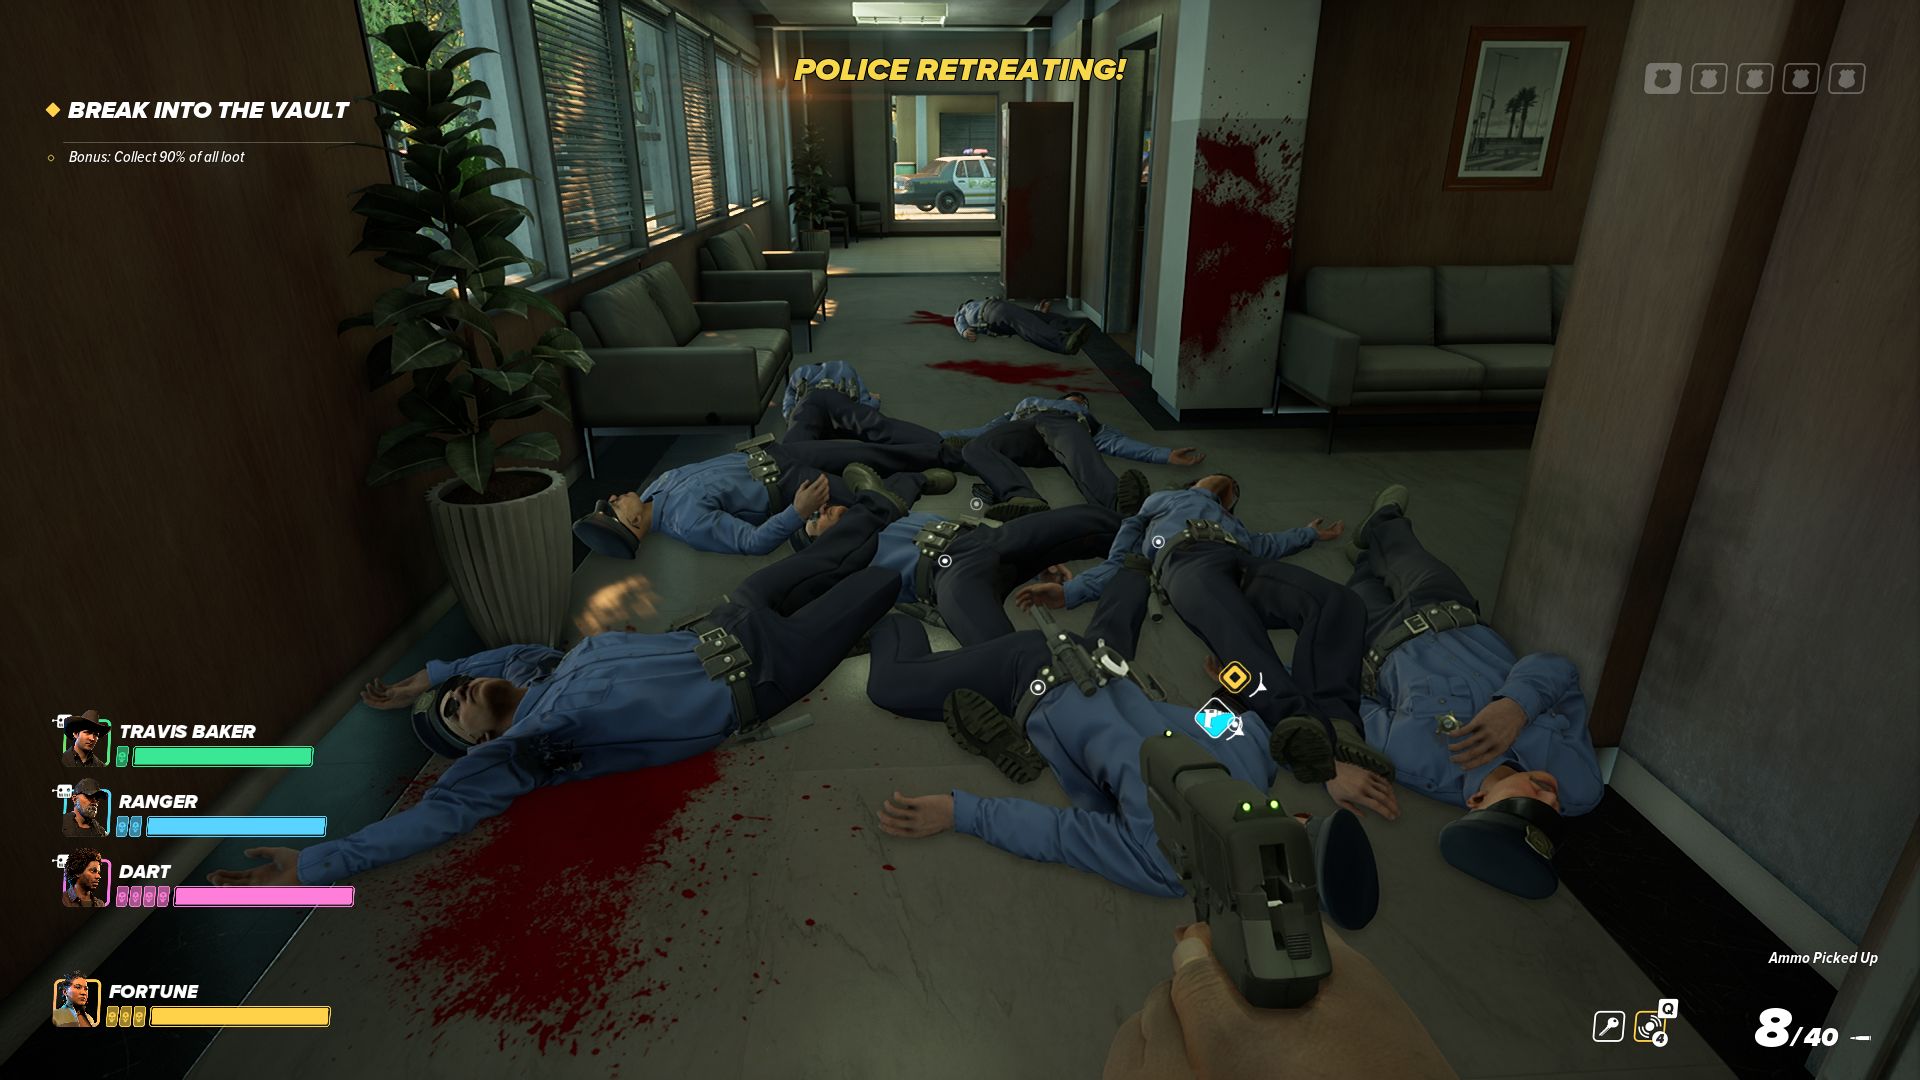 A heap of dead police officers in the hallway of a bank, under the pop up alert telling you the police are retreating